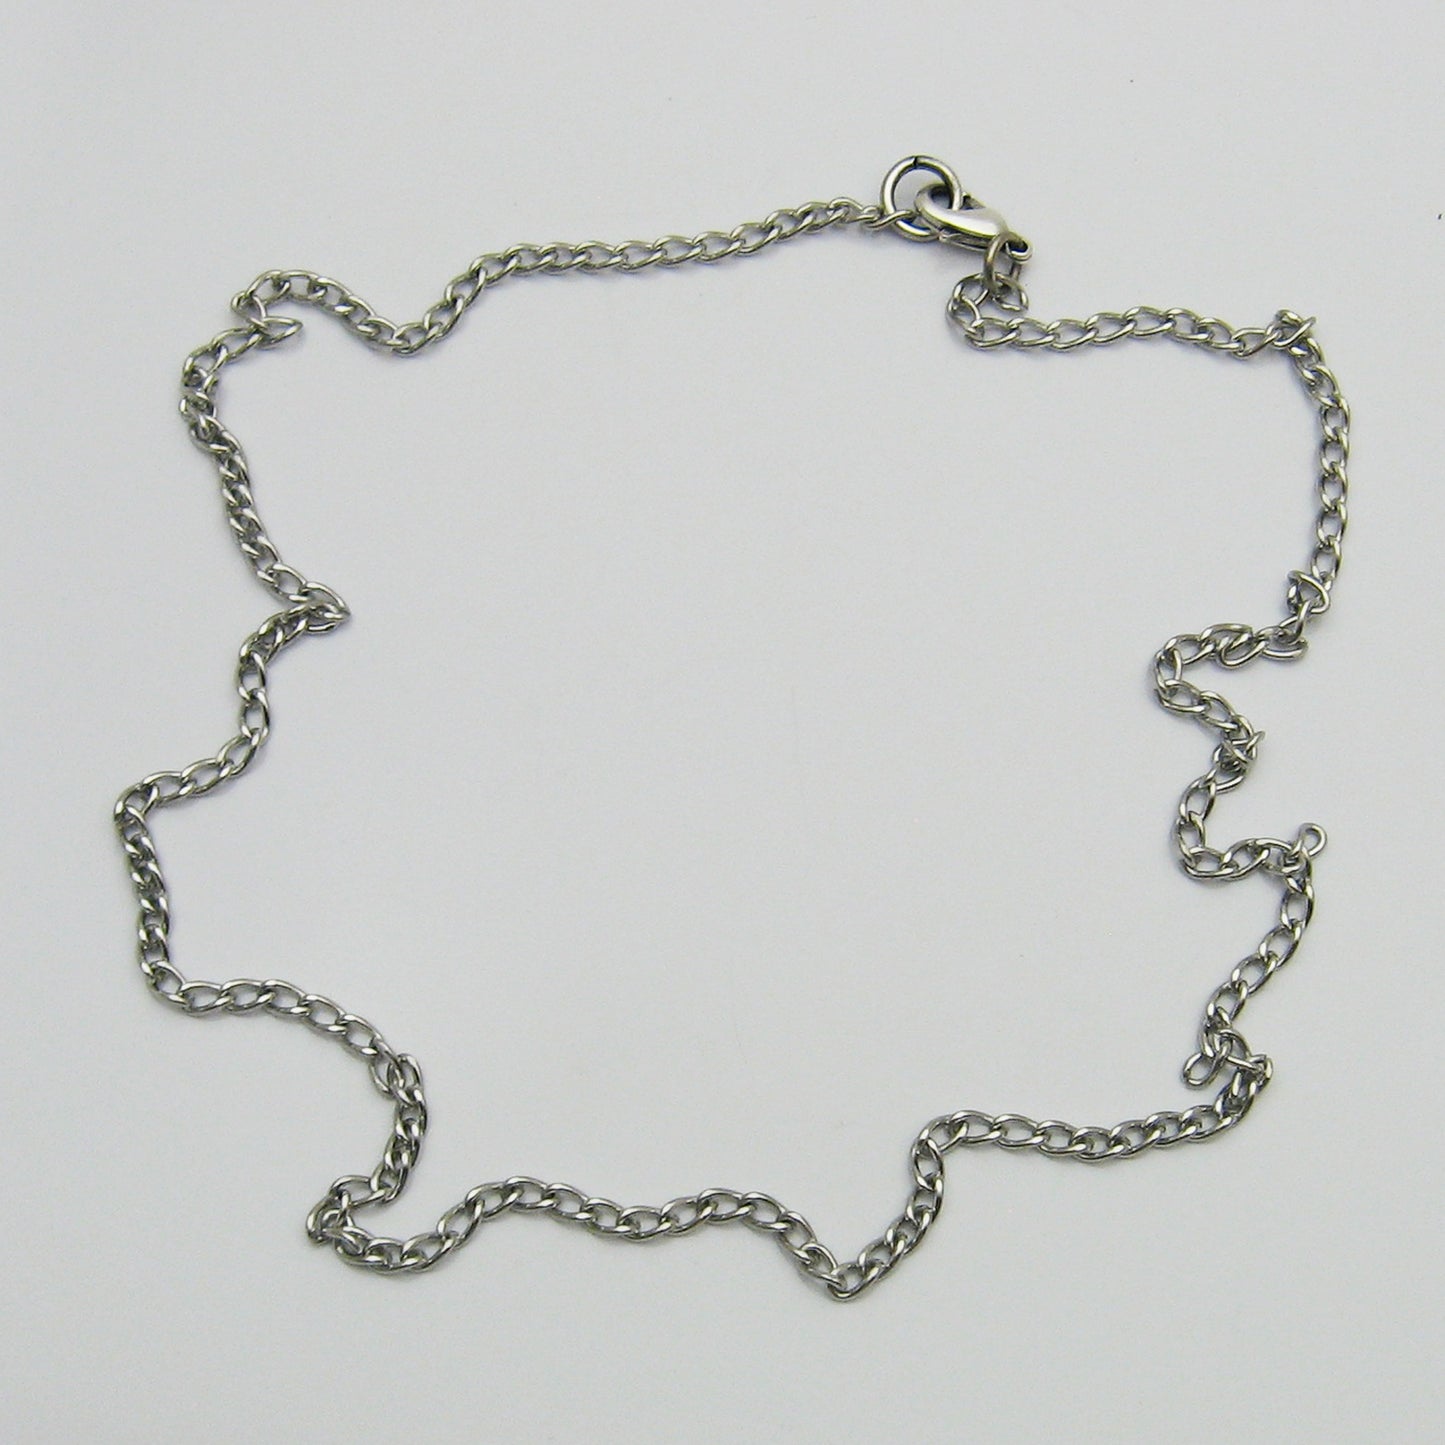 Stainless Steel Curb Chain Necklace